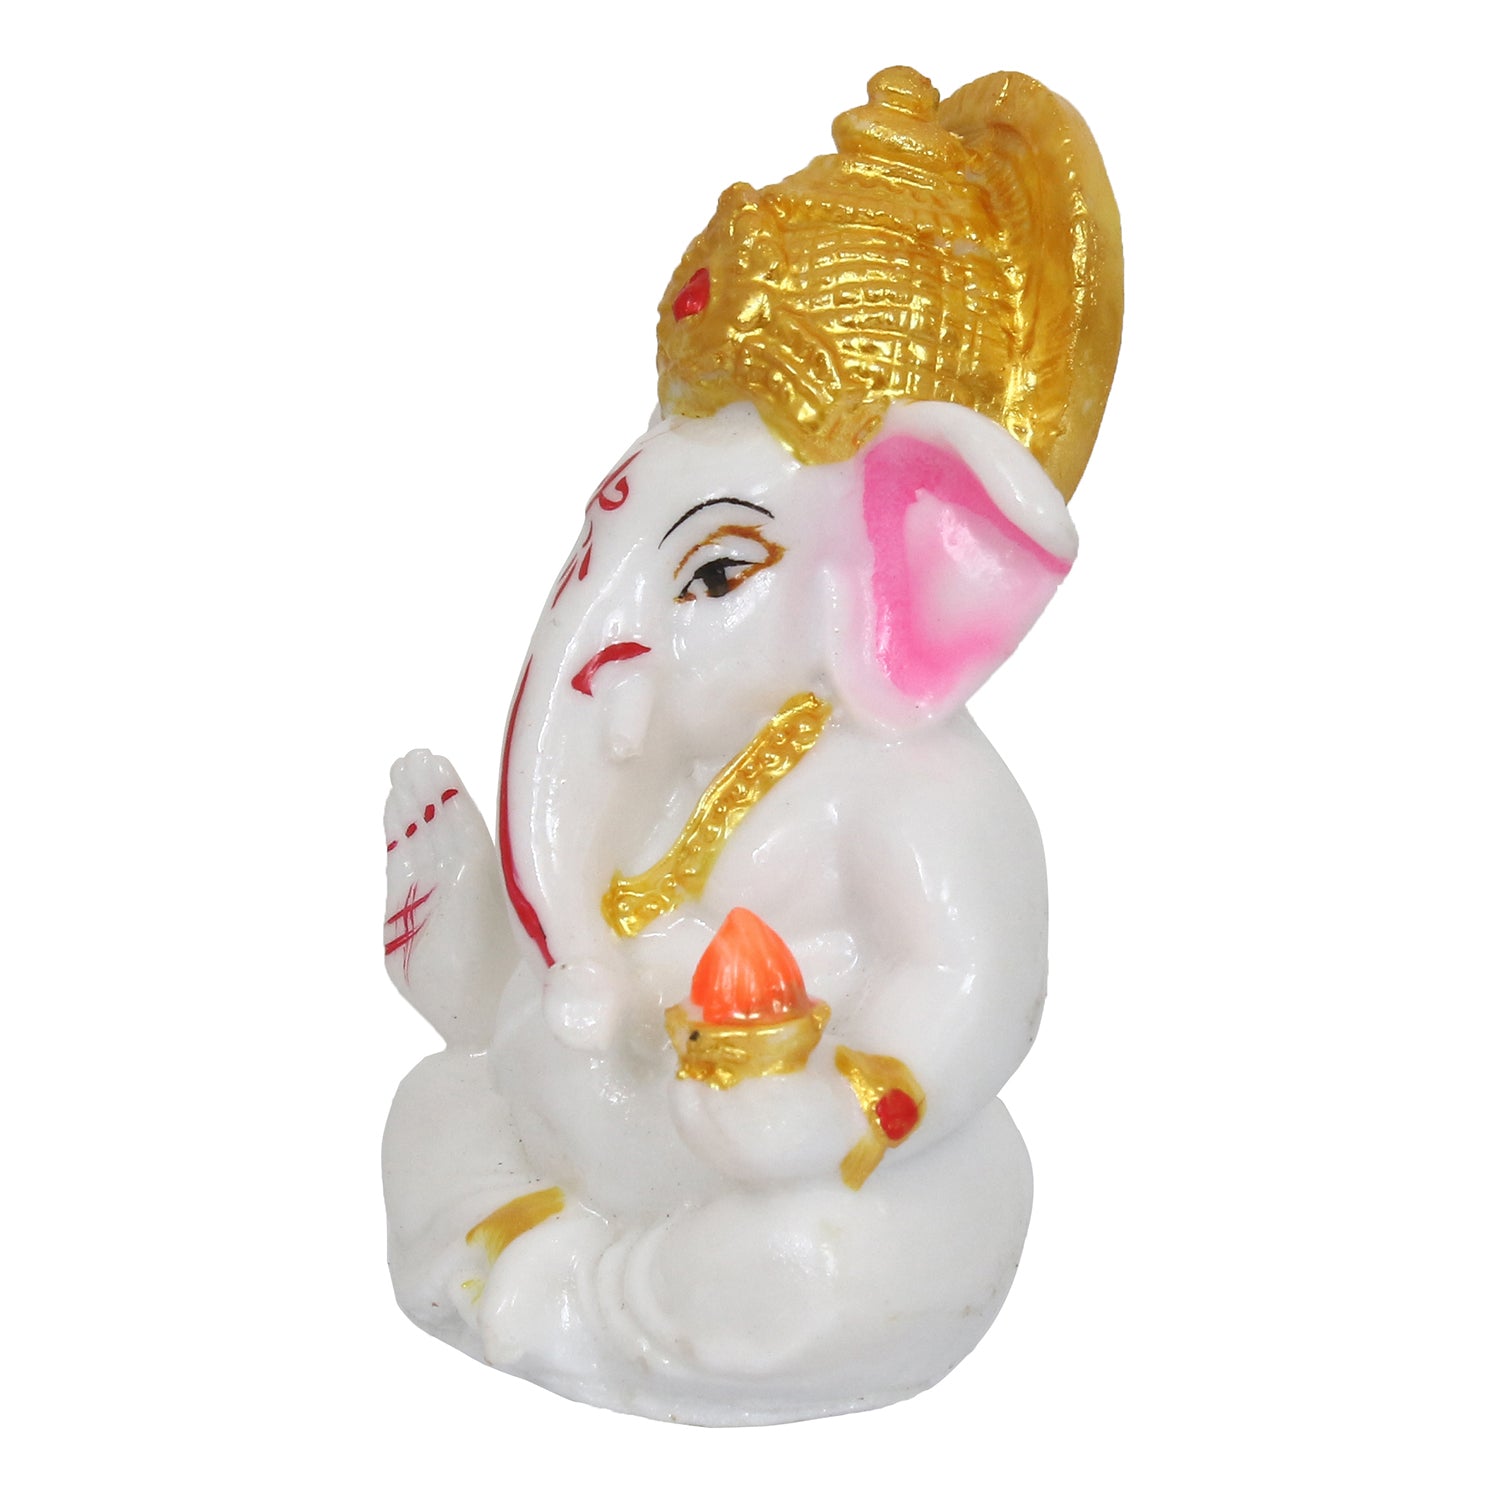 Decorative Lord Ganesha Idol for Car Dashboard, Home Temple and Office Desks 5